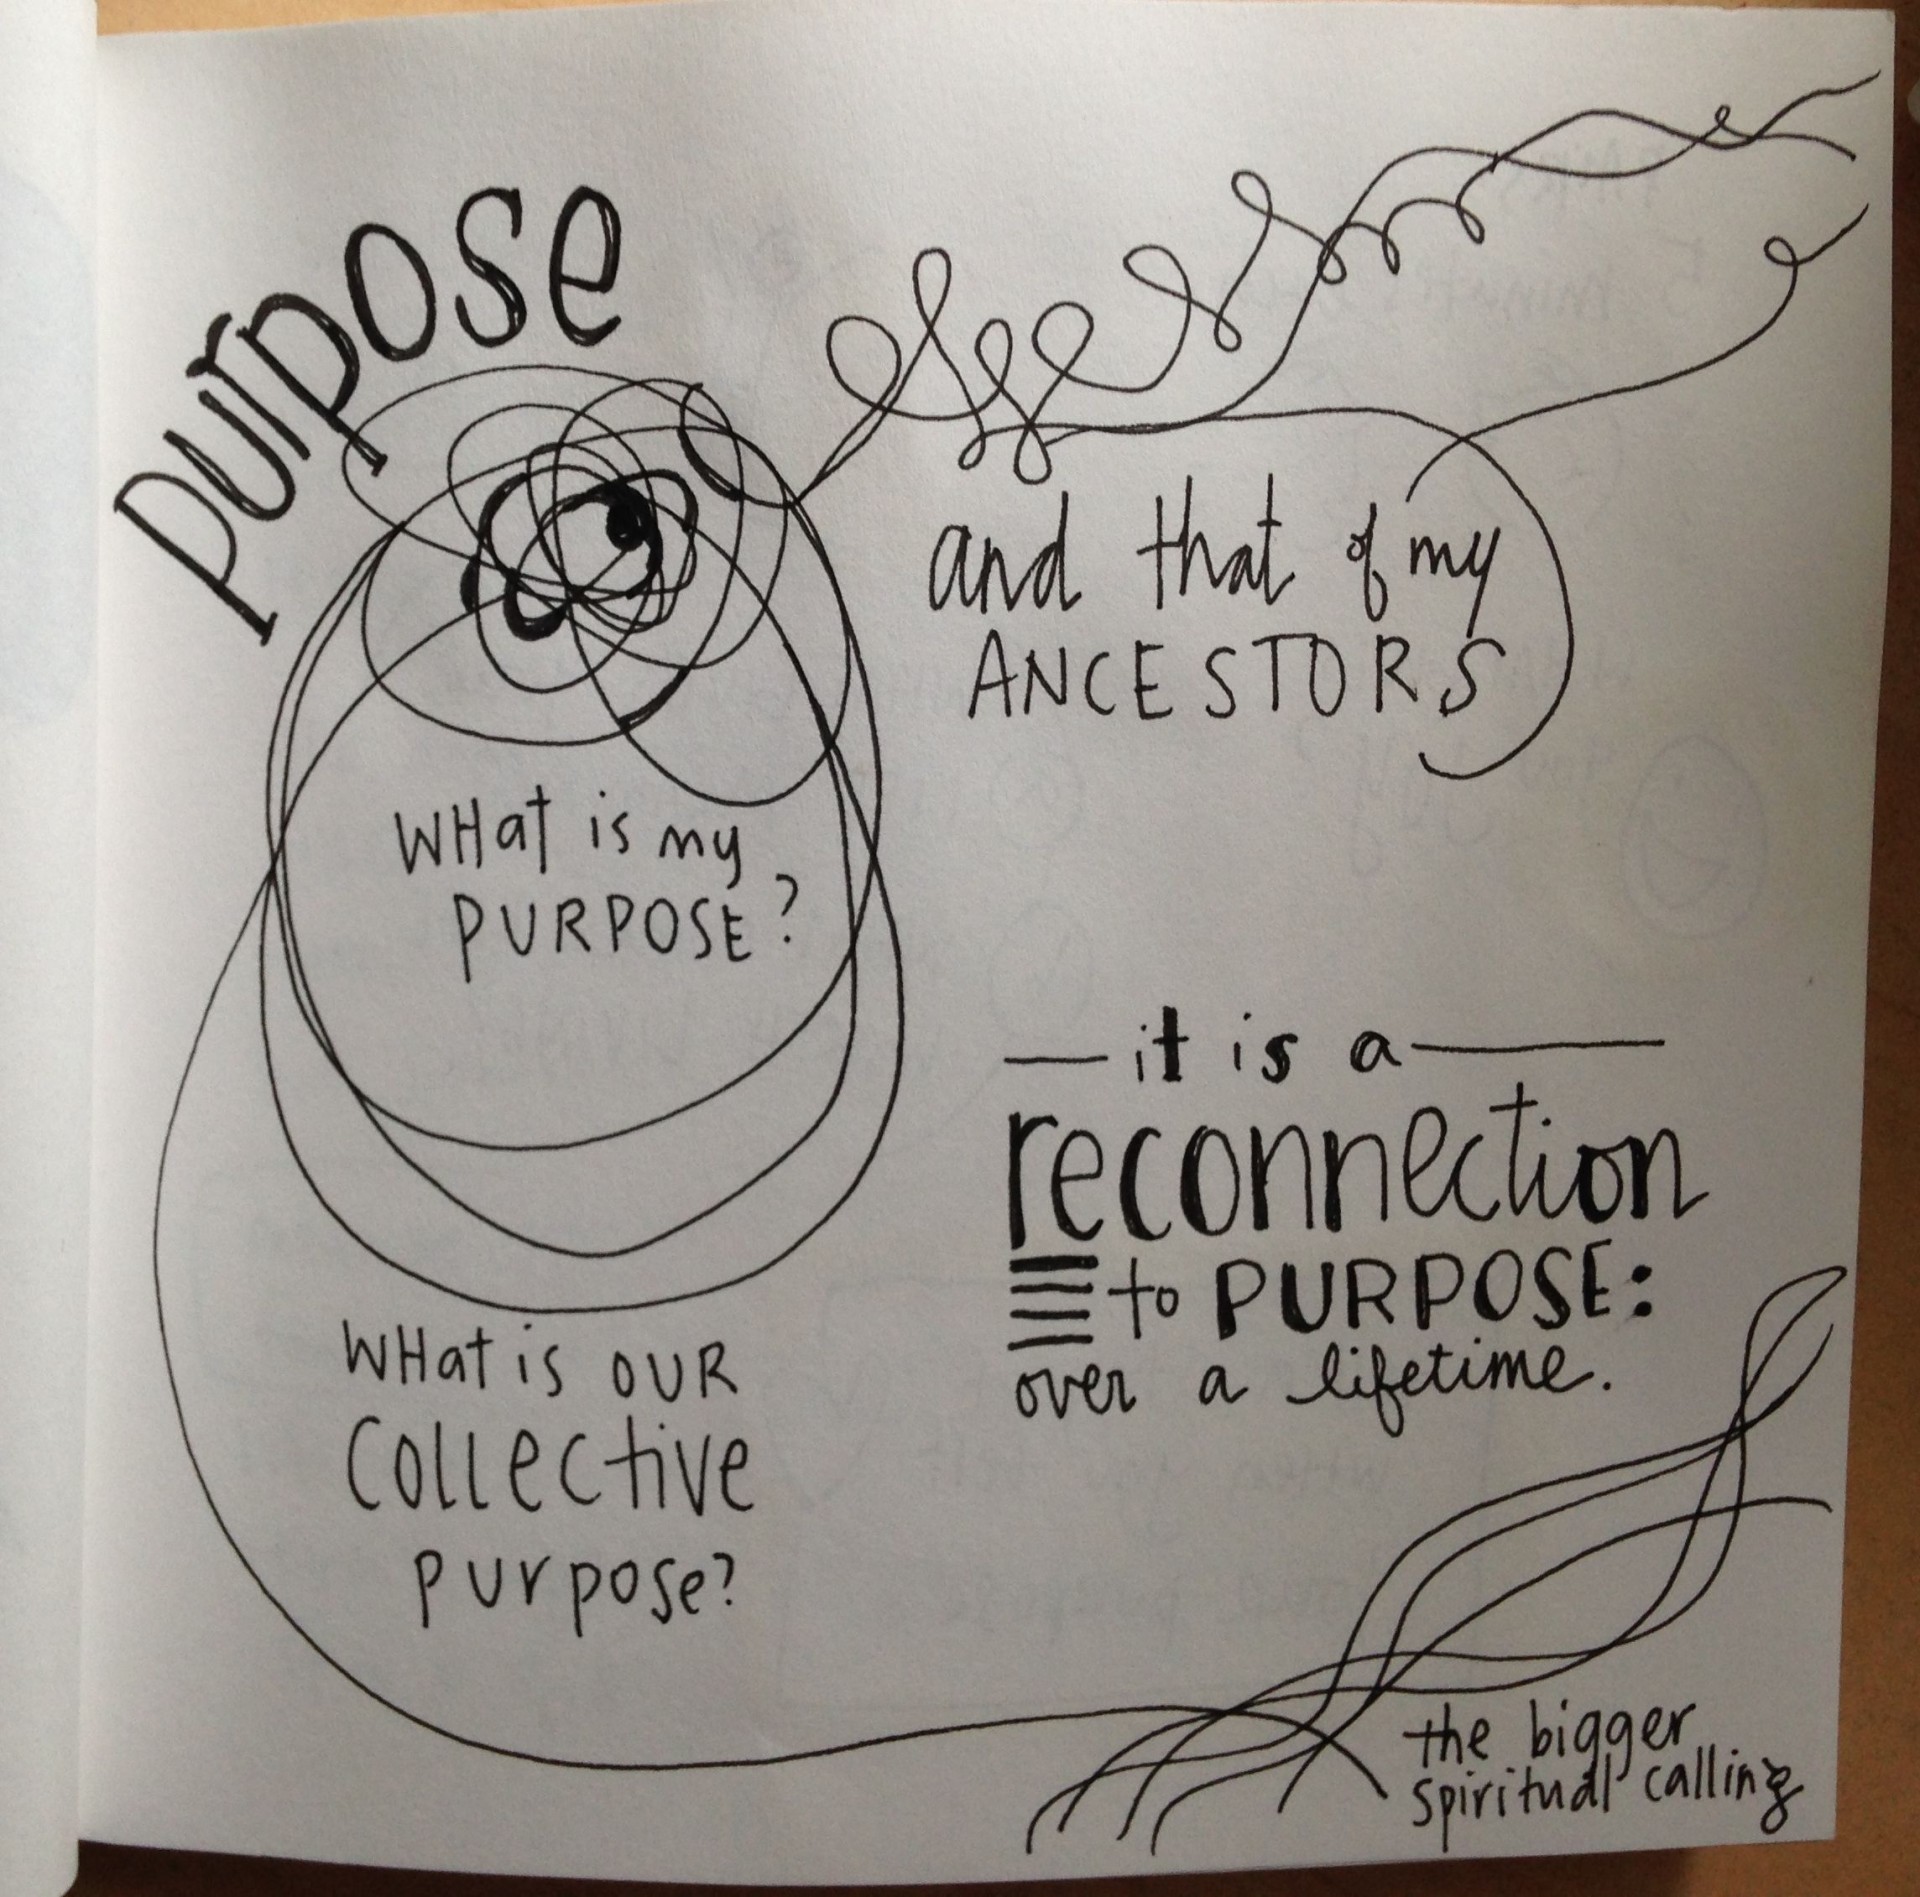 connect and reconnect to purpose with robert gass leadership sketchnotes